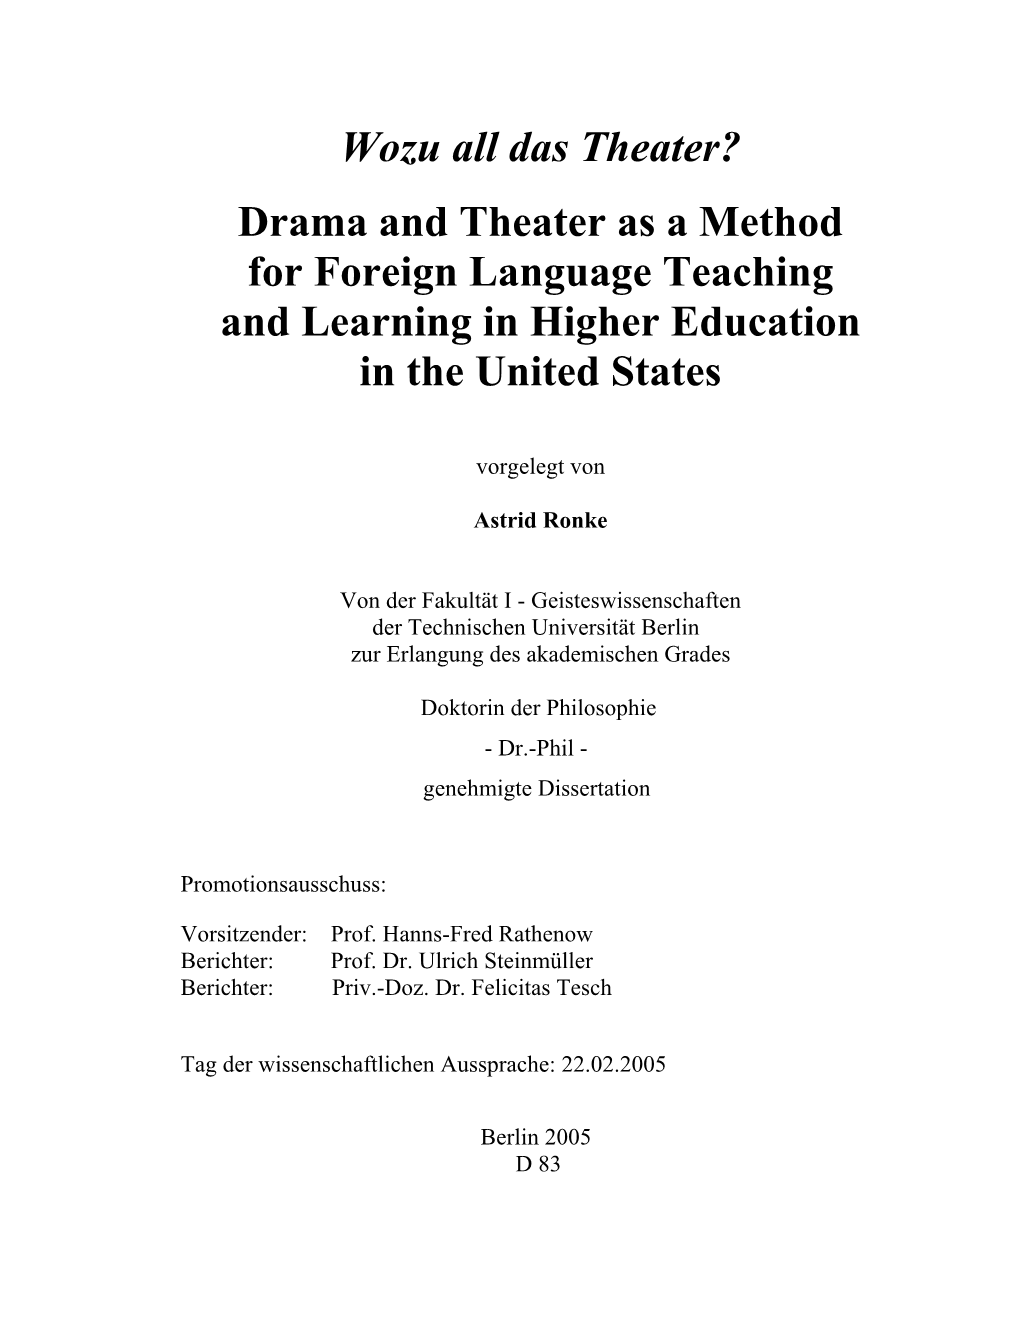 Drama and Theater As a Method for Foreign Language Teaching and Learning in Higher Education in the United States